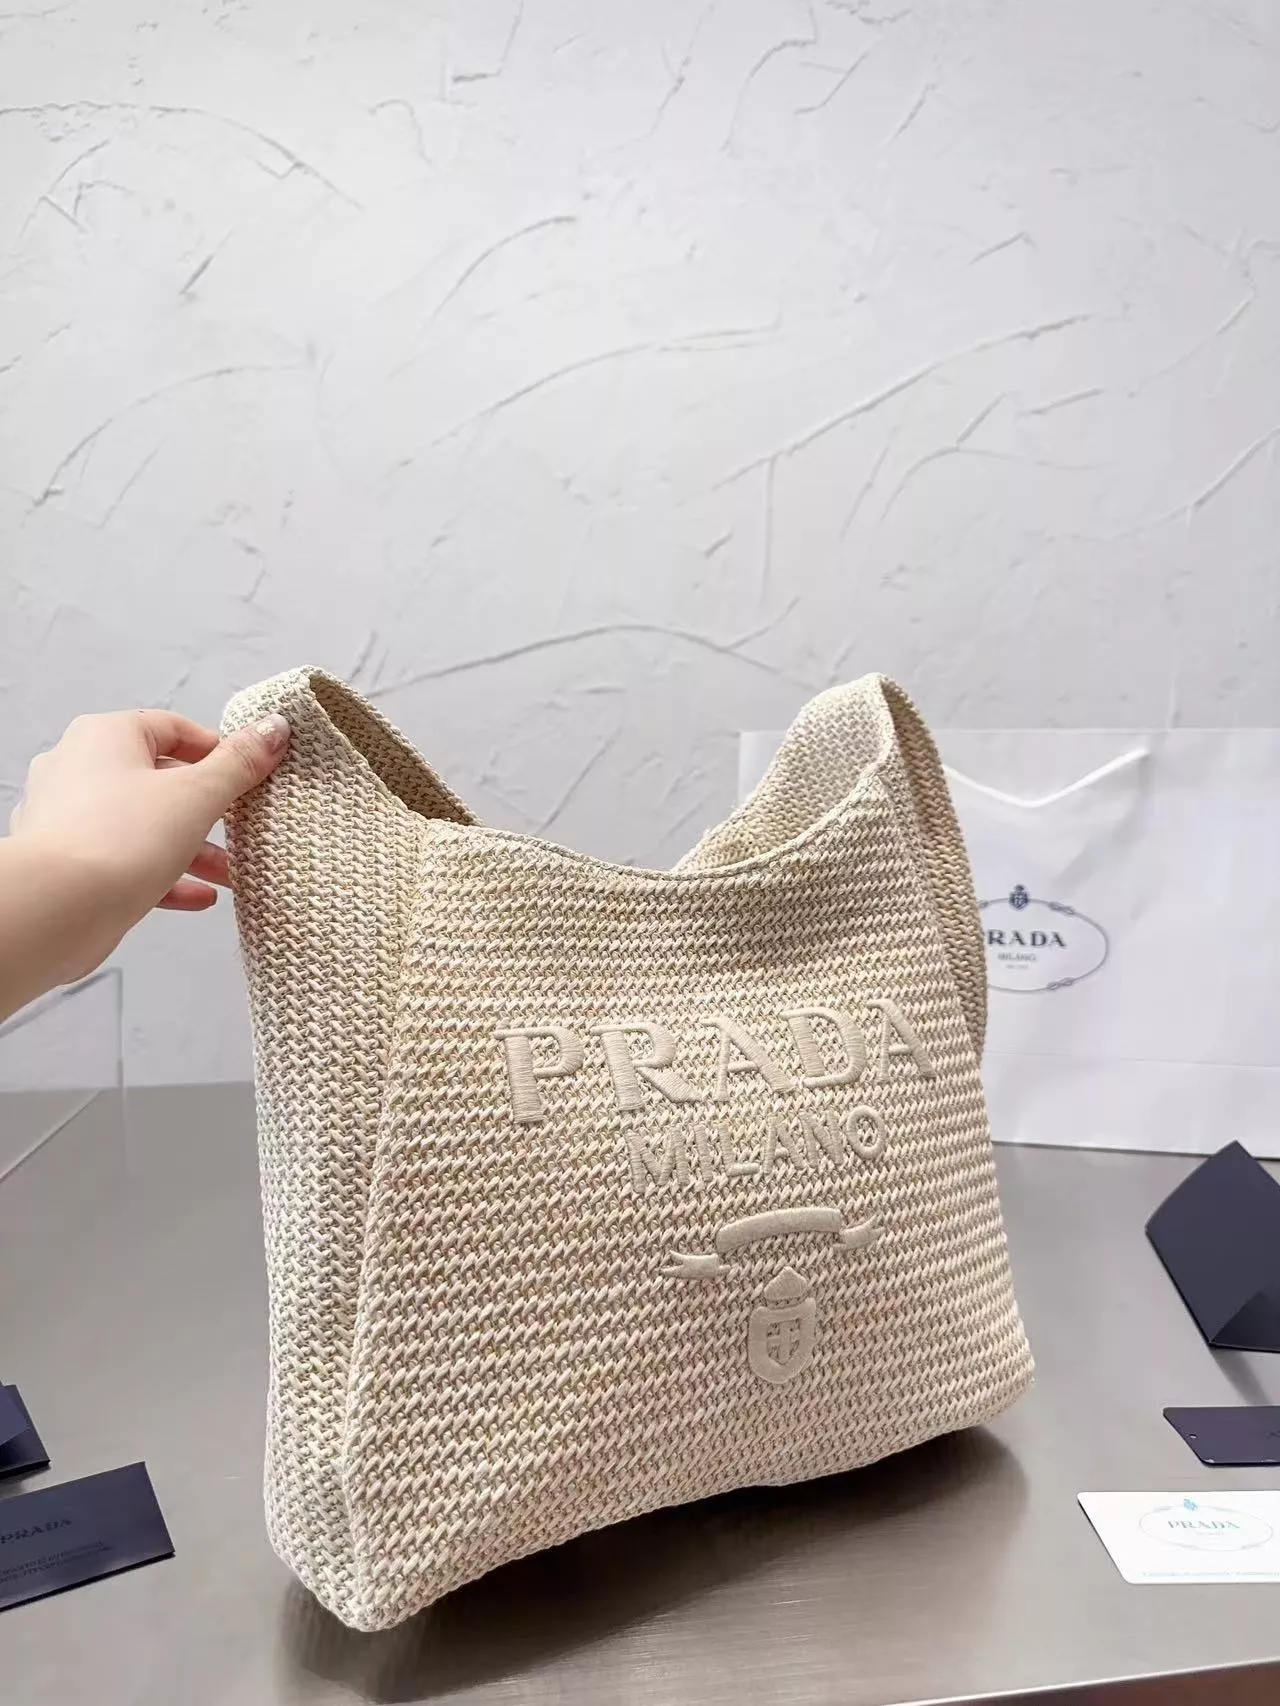 IMPOSSIBLE TO FIND! Prada Raffia Tote Bag Unboxing + Review! 